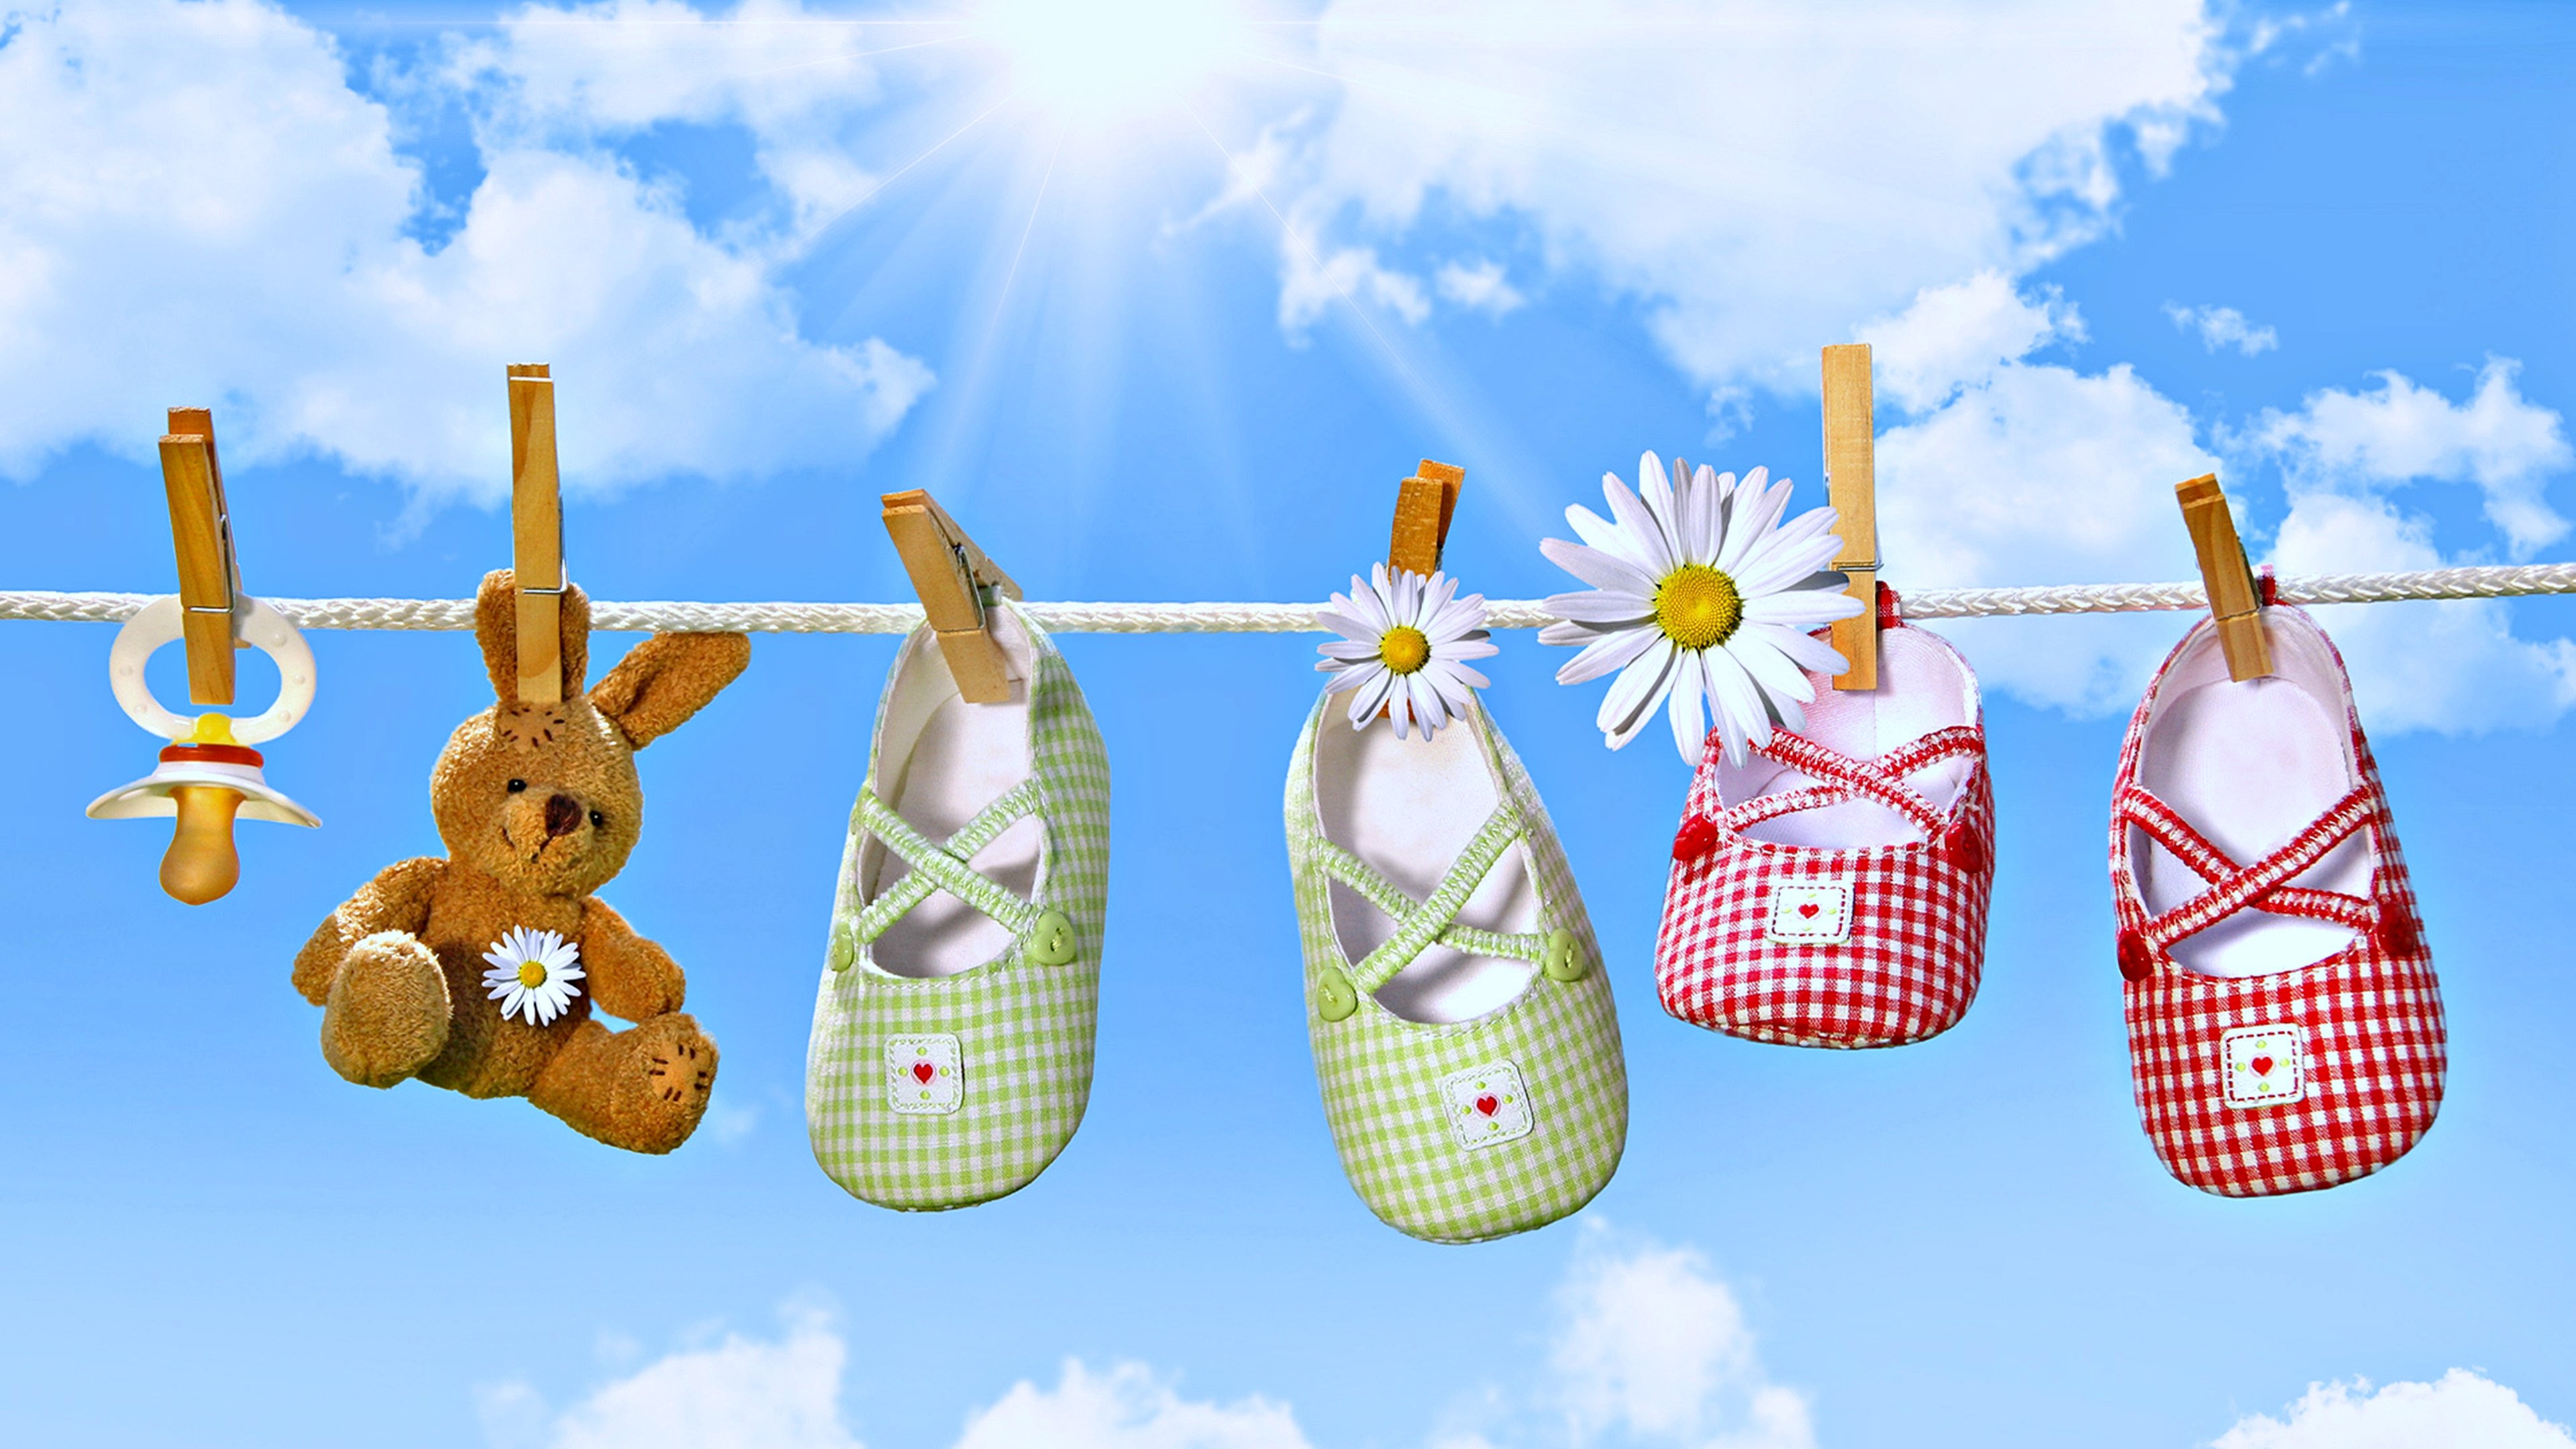 shoes, Teddy, Flowers, Spring, Sky, Clouds, Sunny, Kids, Children, Little, Drying, Mum, Family, Washing Wallpaper